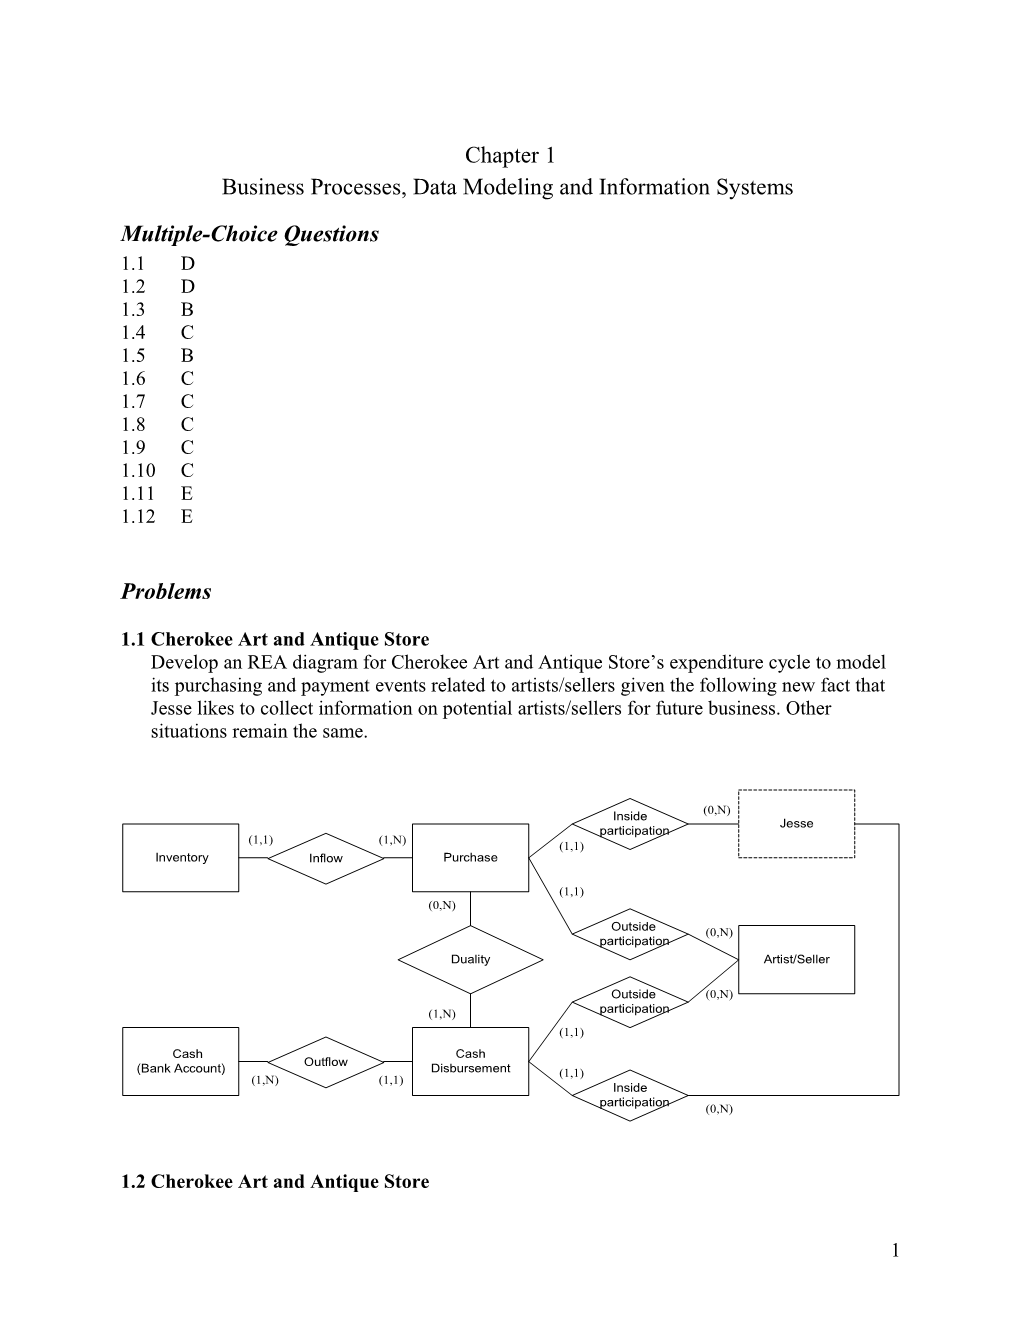 Develop an REA Diagram for Cherokee Art and Antique Store S Acquisition Activities to Model